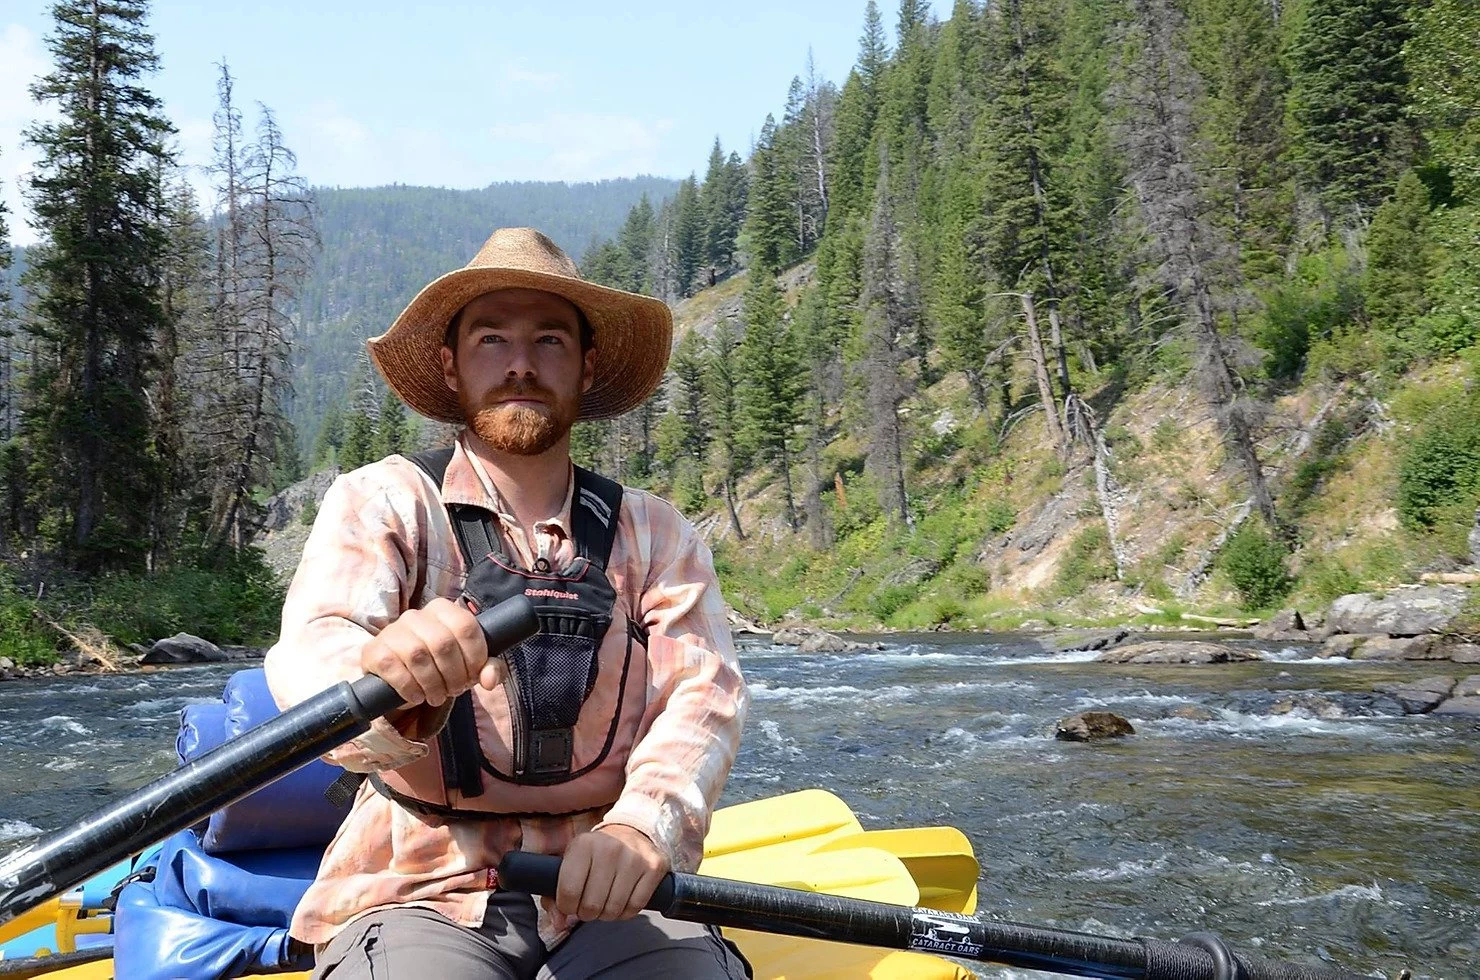 Guiding on the Middle Fork of the Salmon River in Idaho